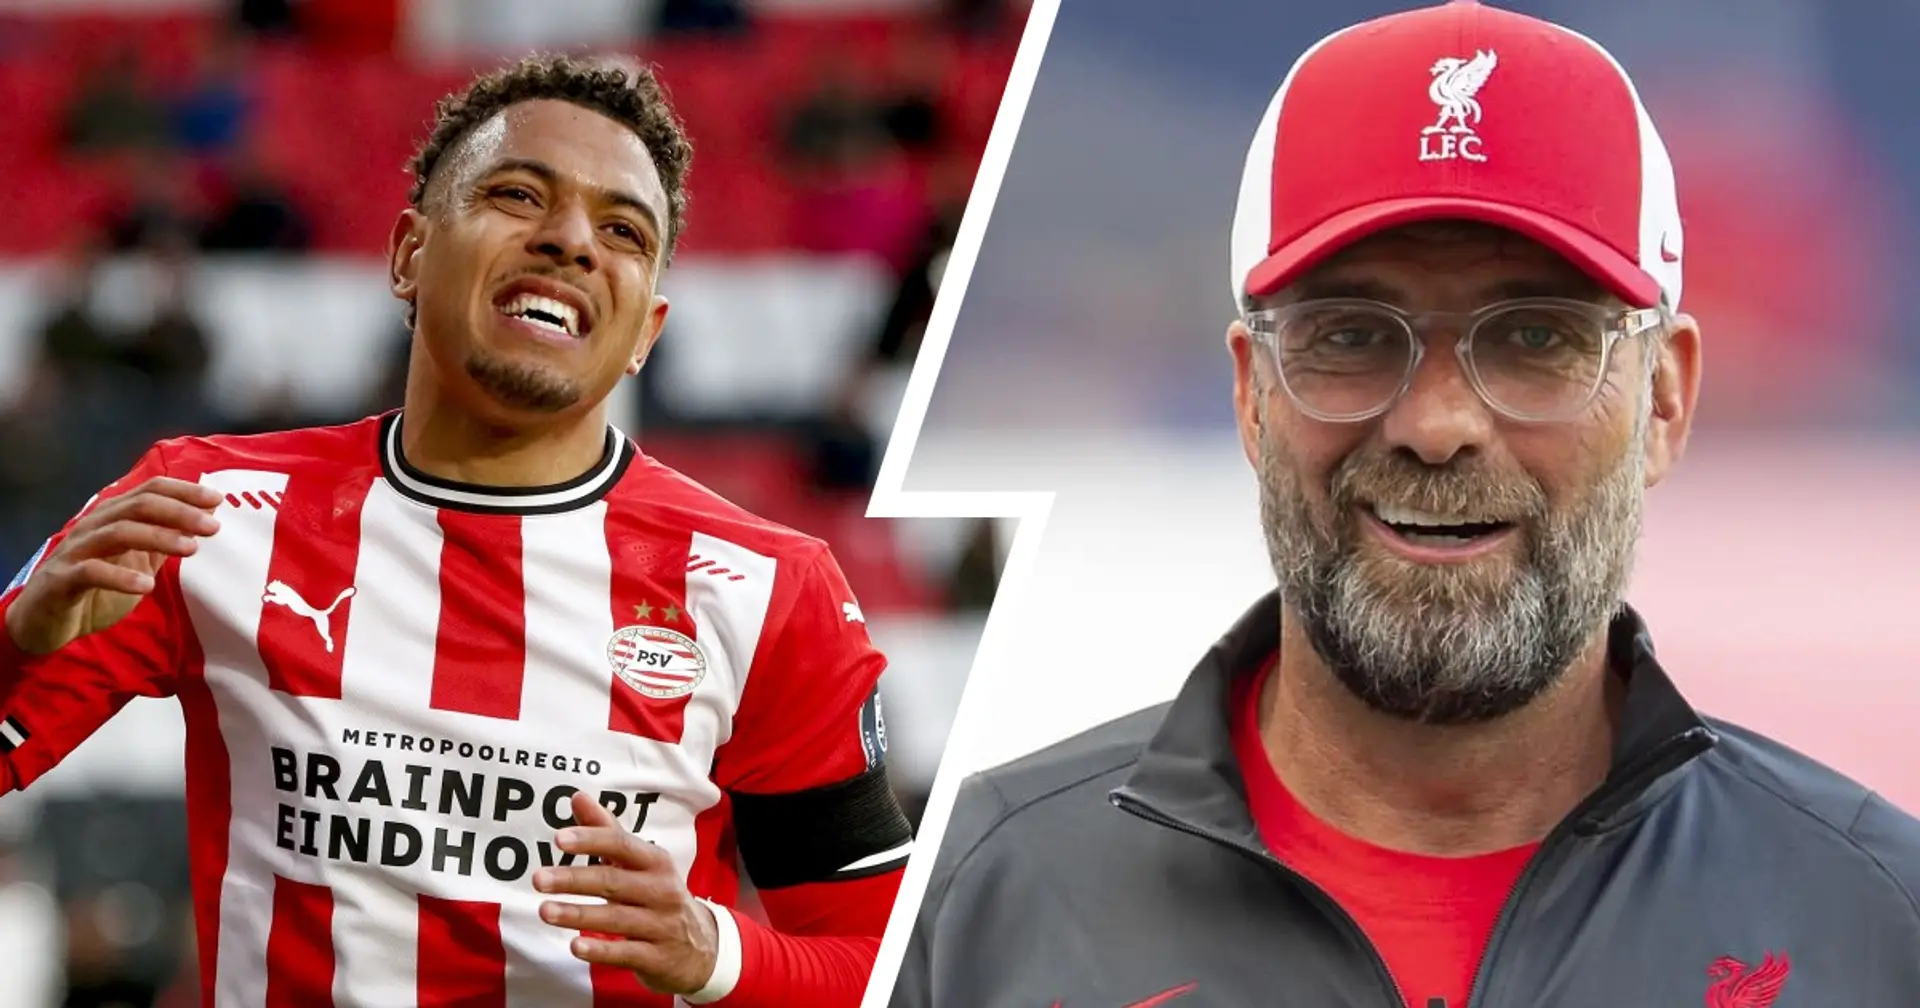 'I'd be lying if I said': LFC fan names 1 reason Malen signing could work but 2 to explain why it's unlikely to happen